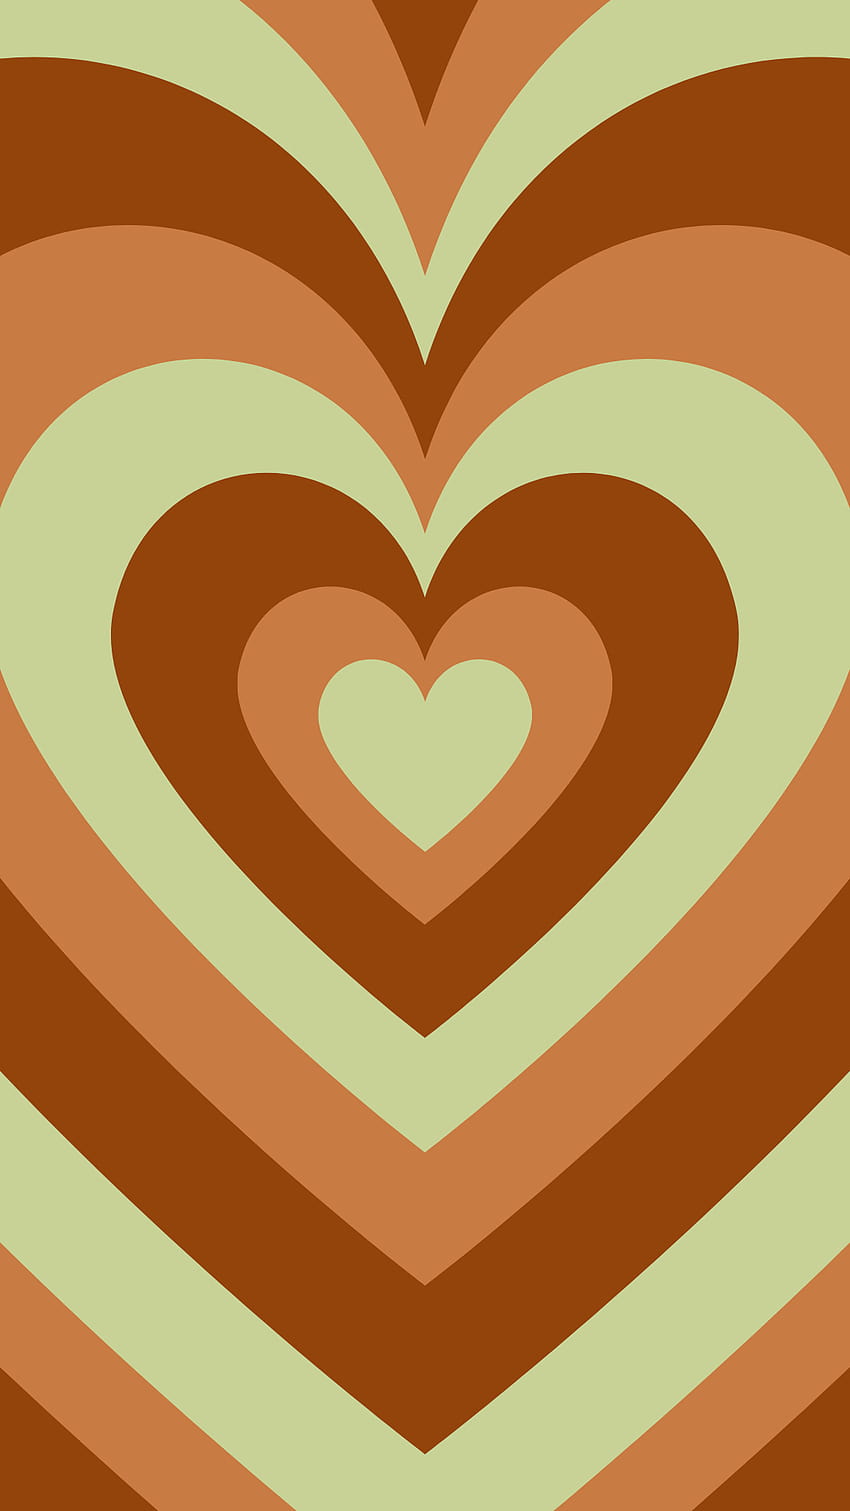 Seamless vintage heart pattern background Vector Image